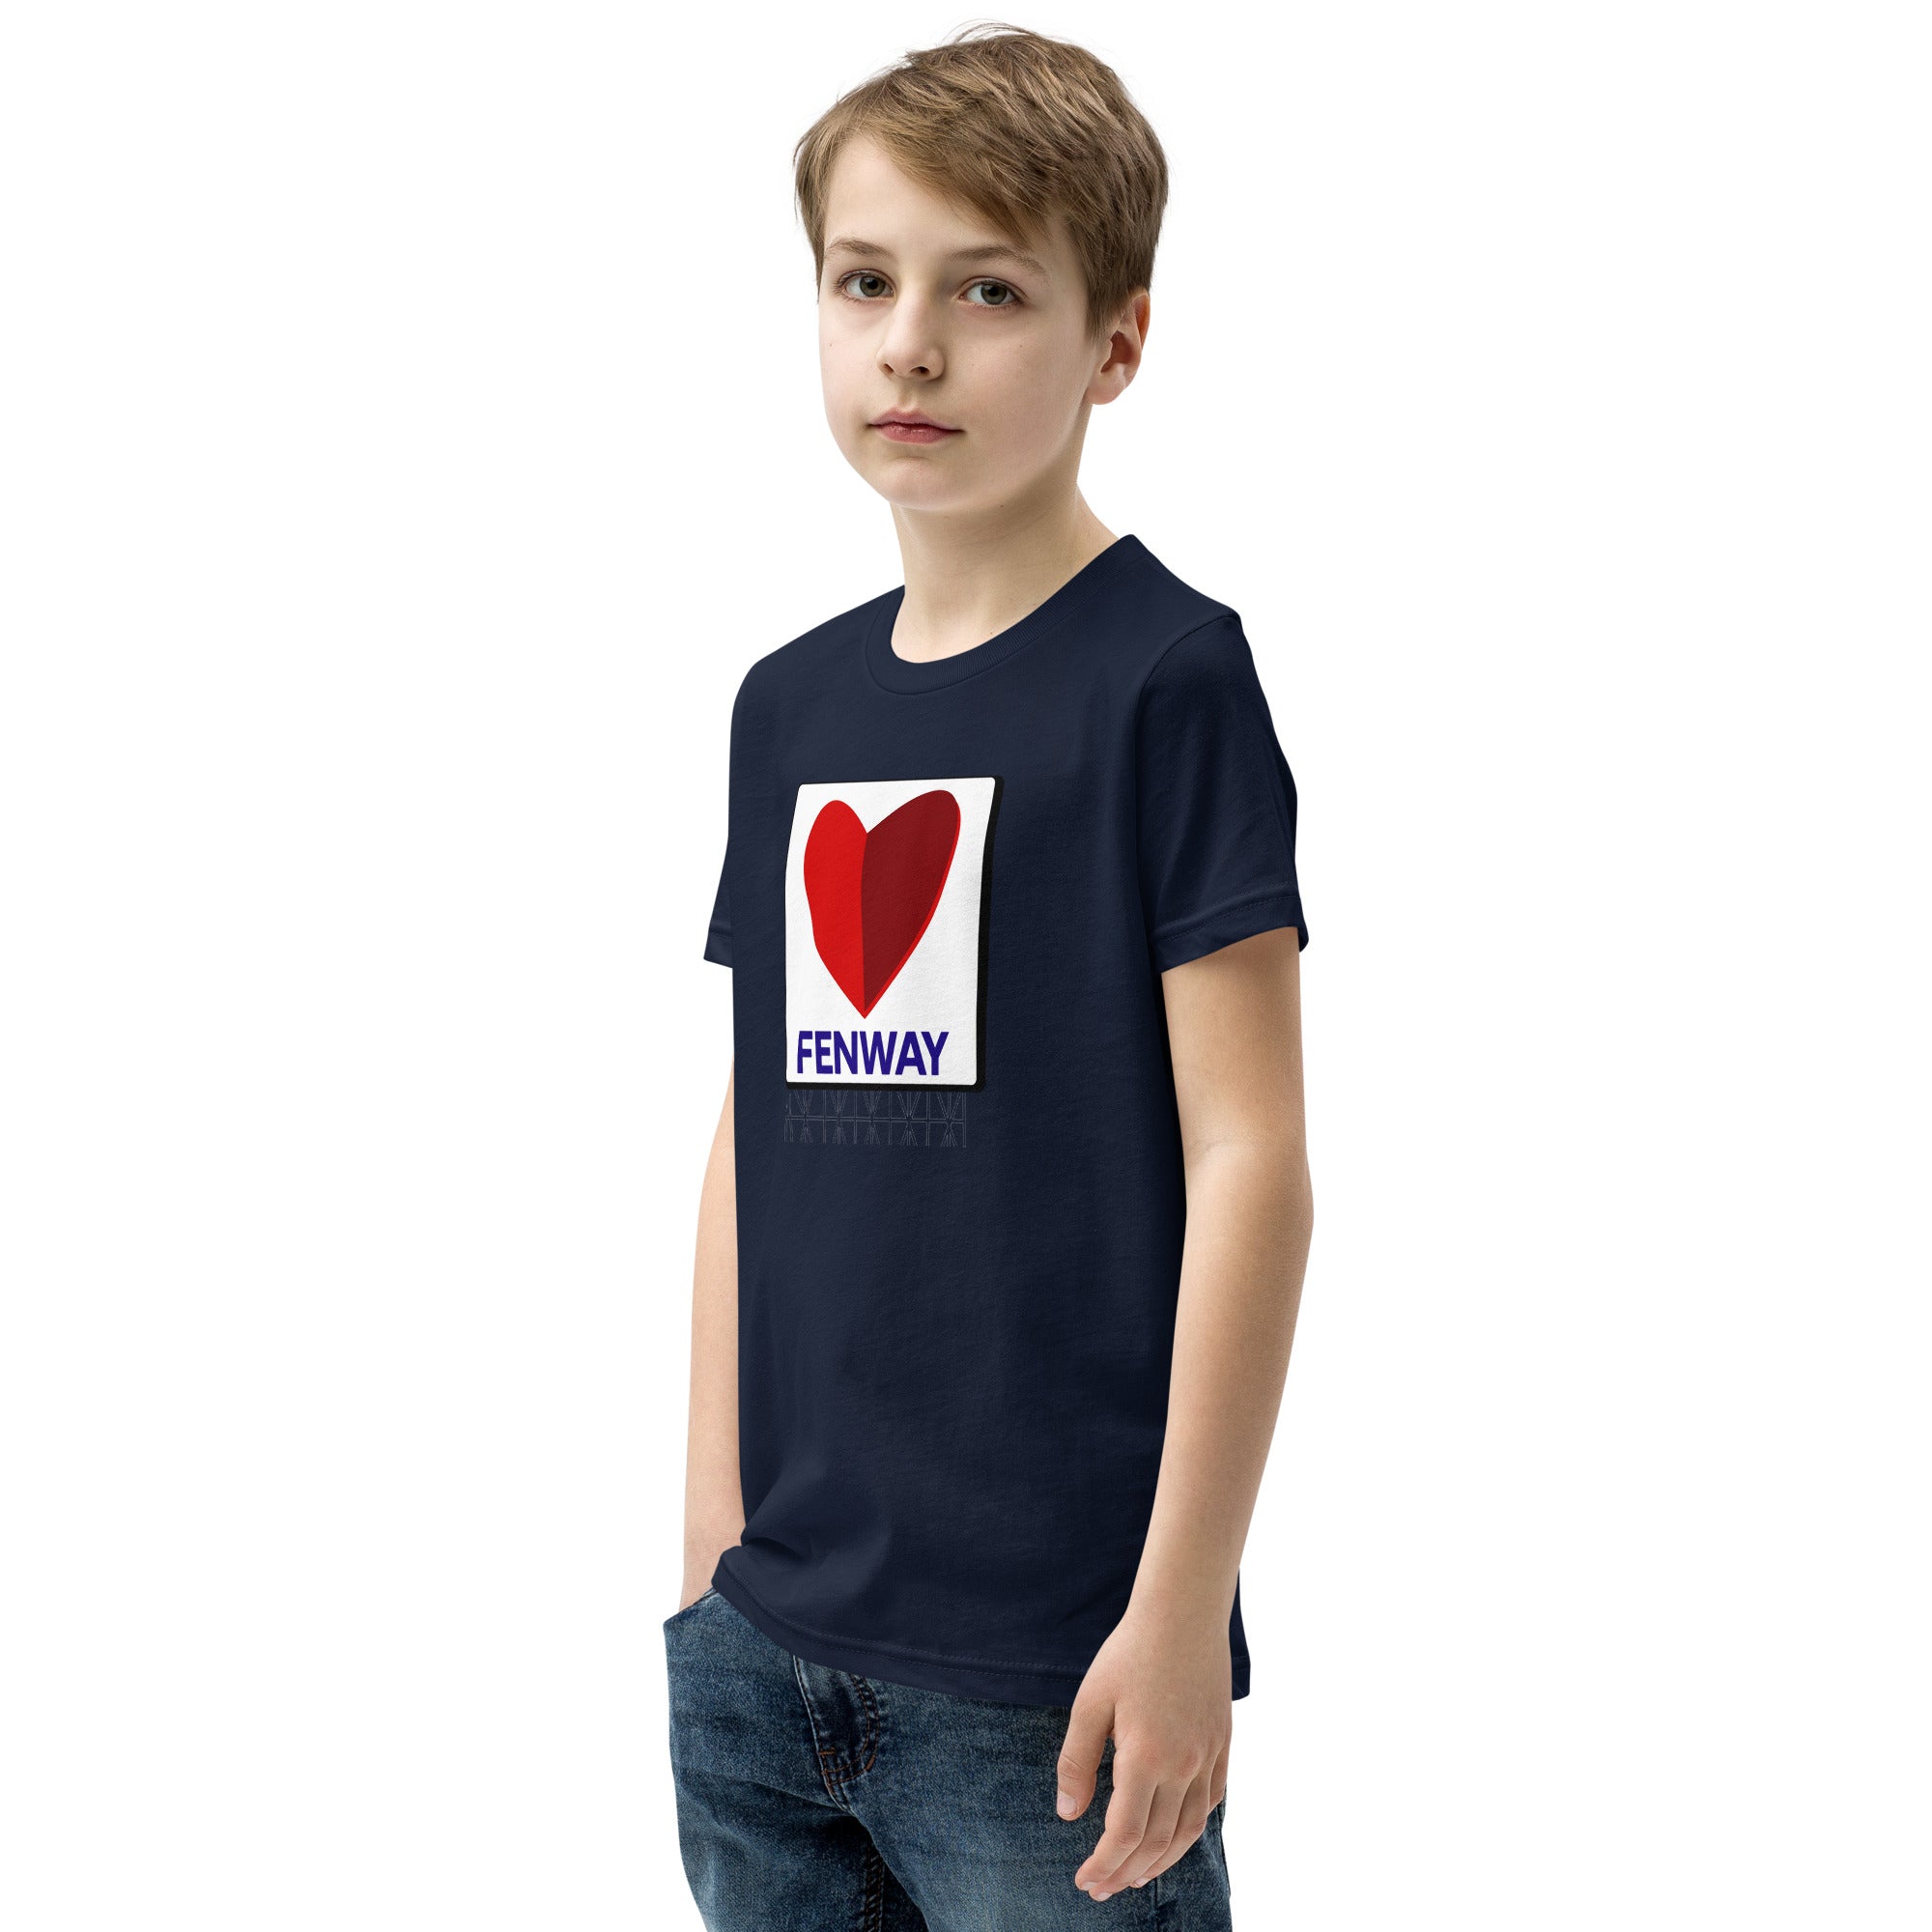 photo of boy wearing a navy blue t-shirt with graphic of the citgo sign boston fenway as a heart